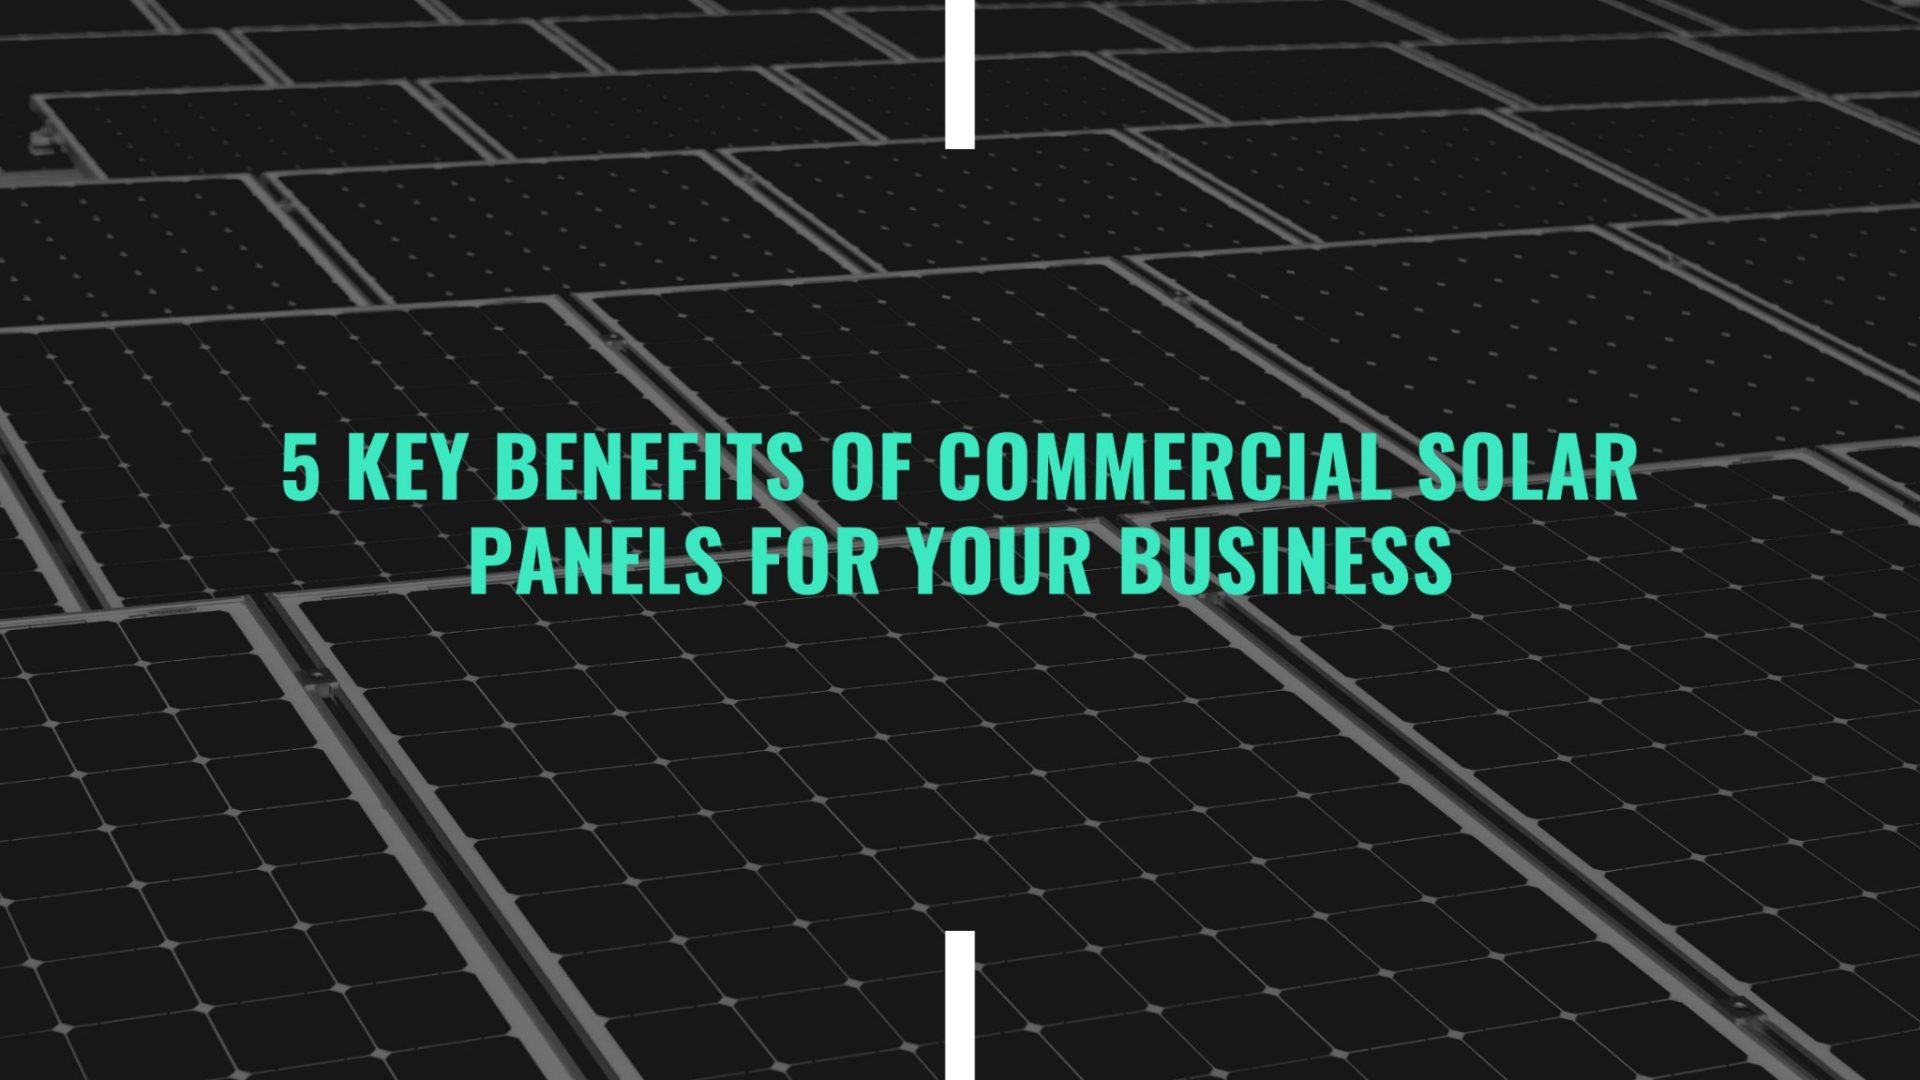 5 Key Benefits of Commercial Solar Panels for Your Business